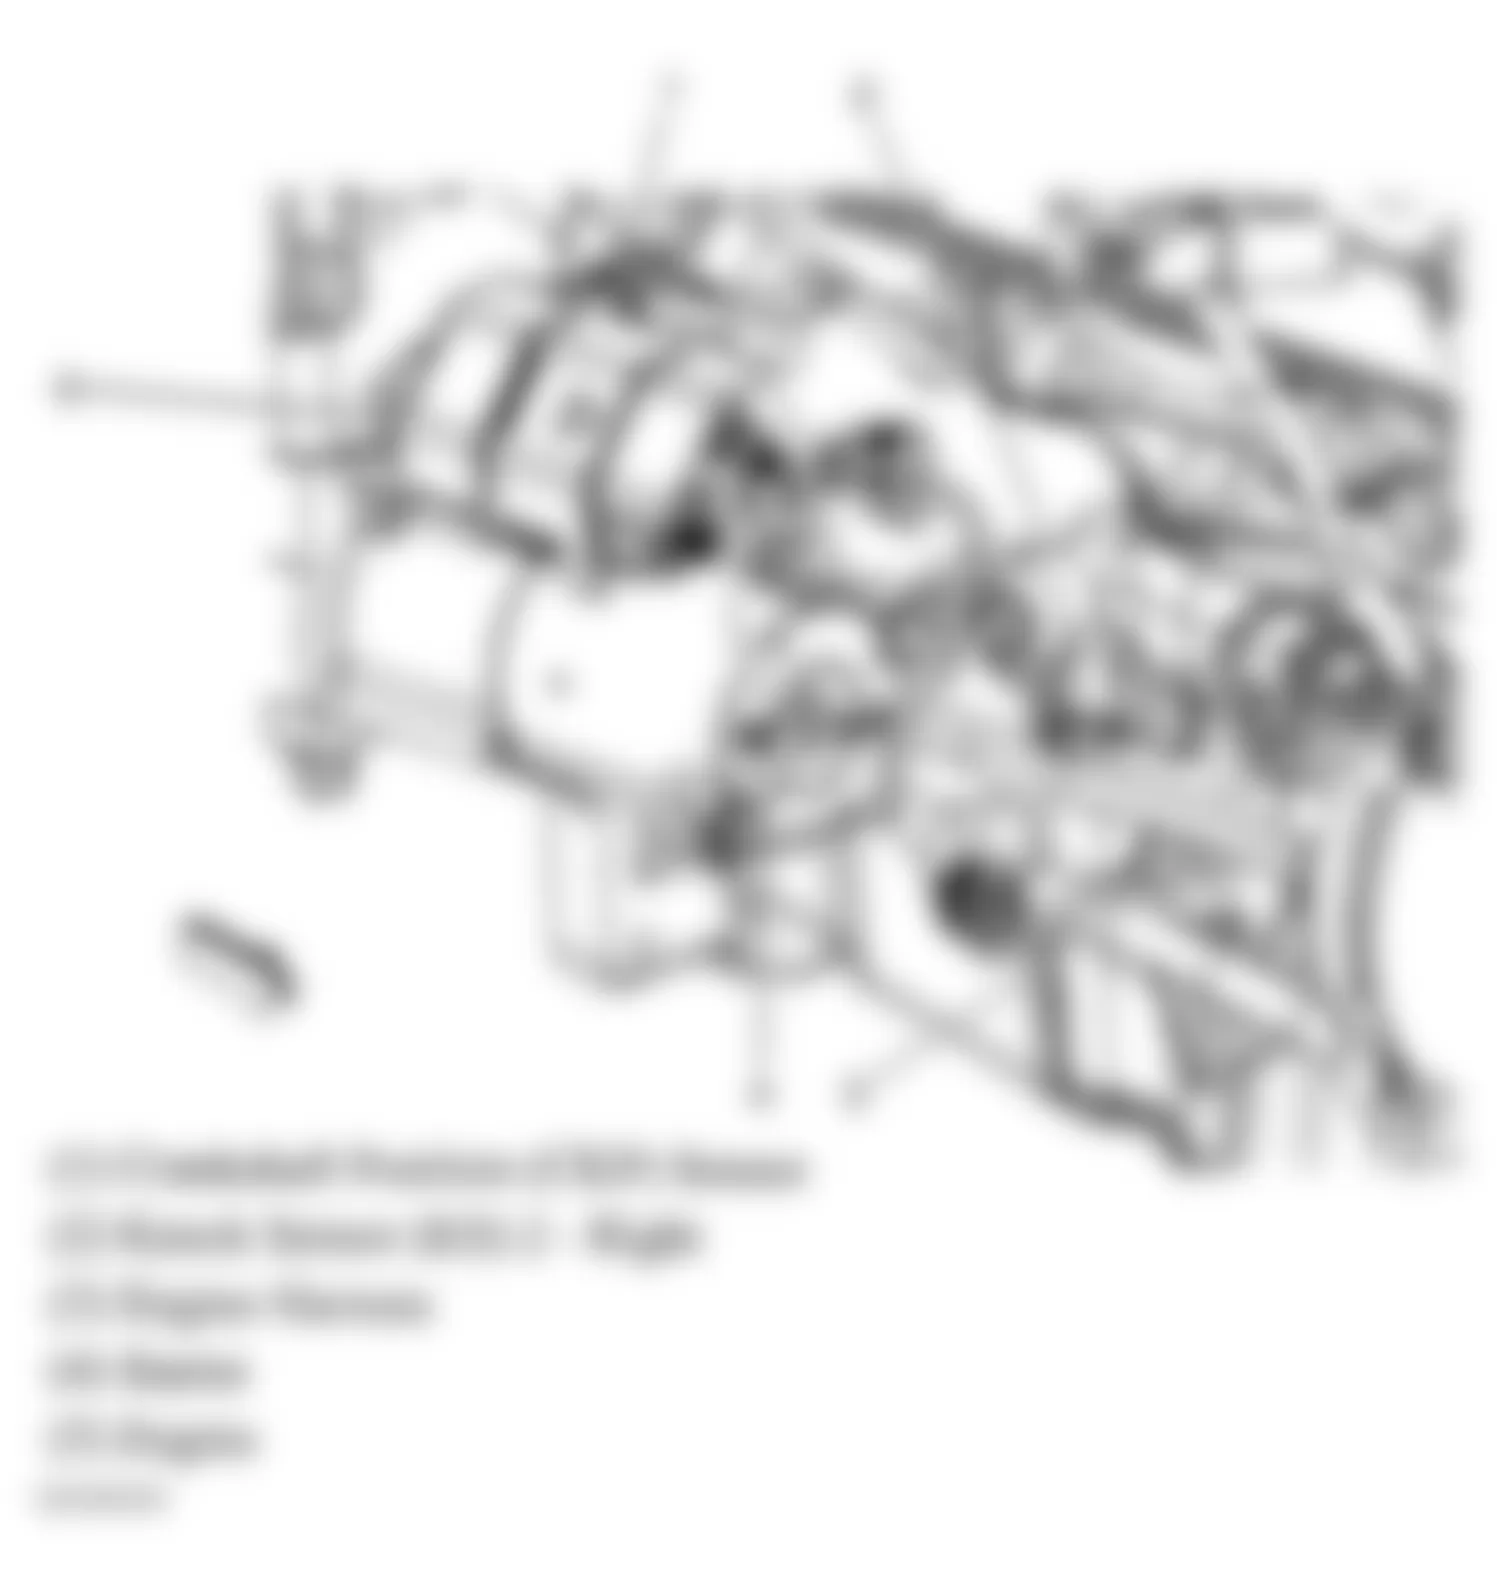 GMC Envoy 2005 - Component Locations -  Lower Right Rear Of Engine (5.3L)